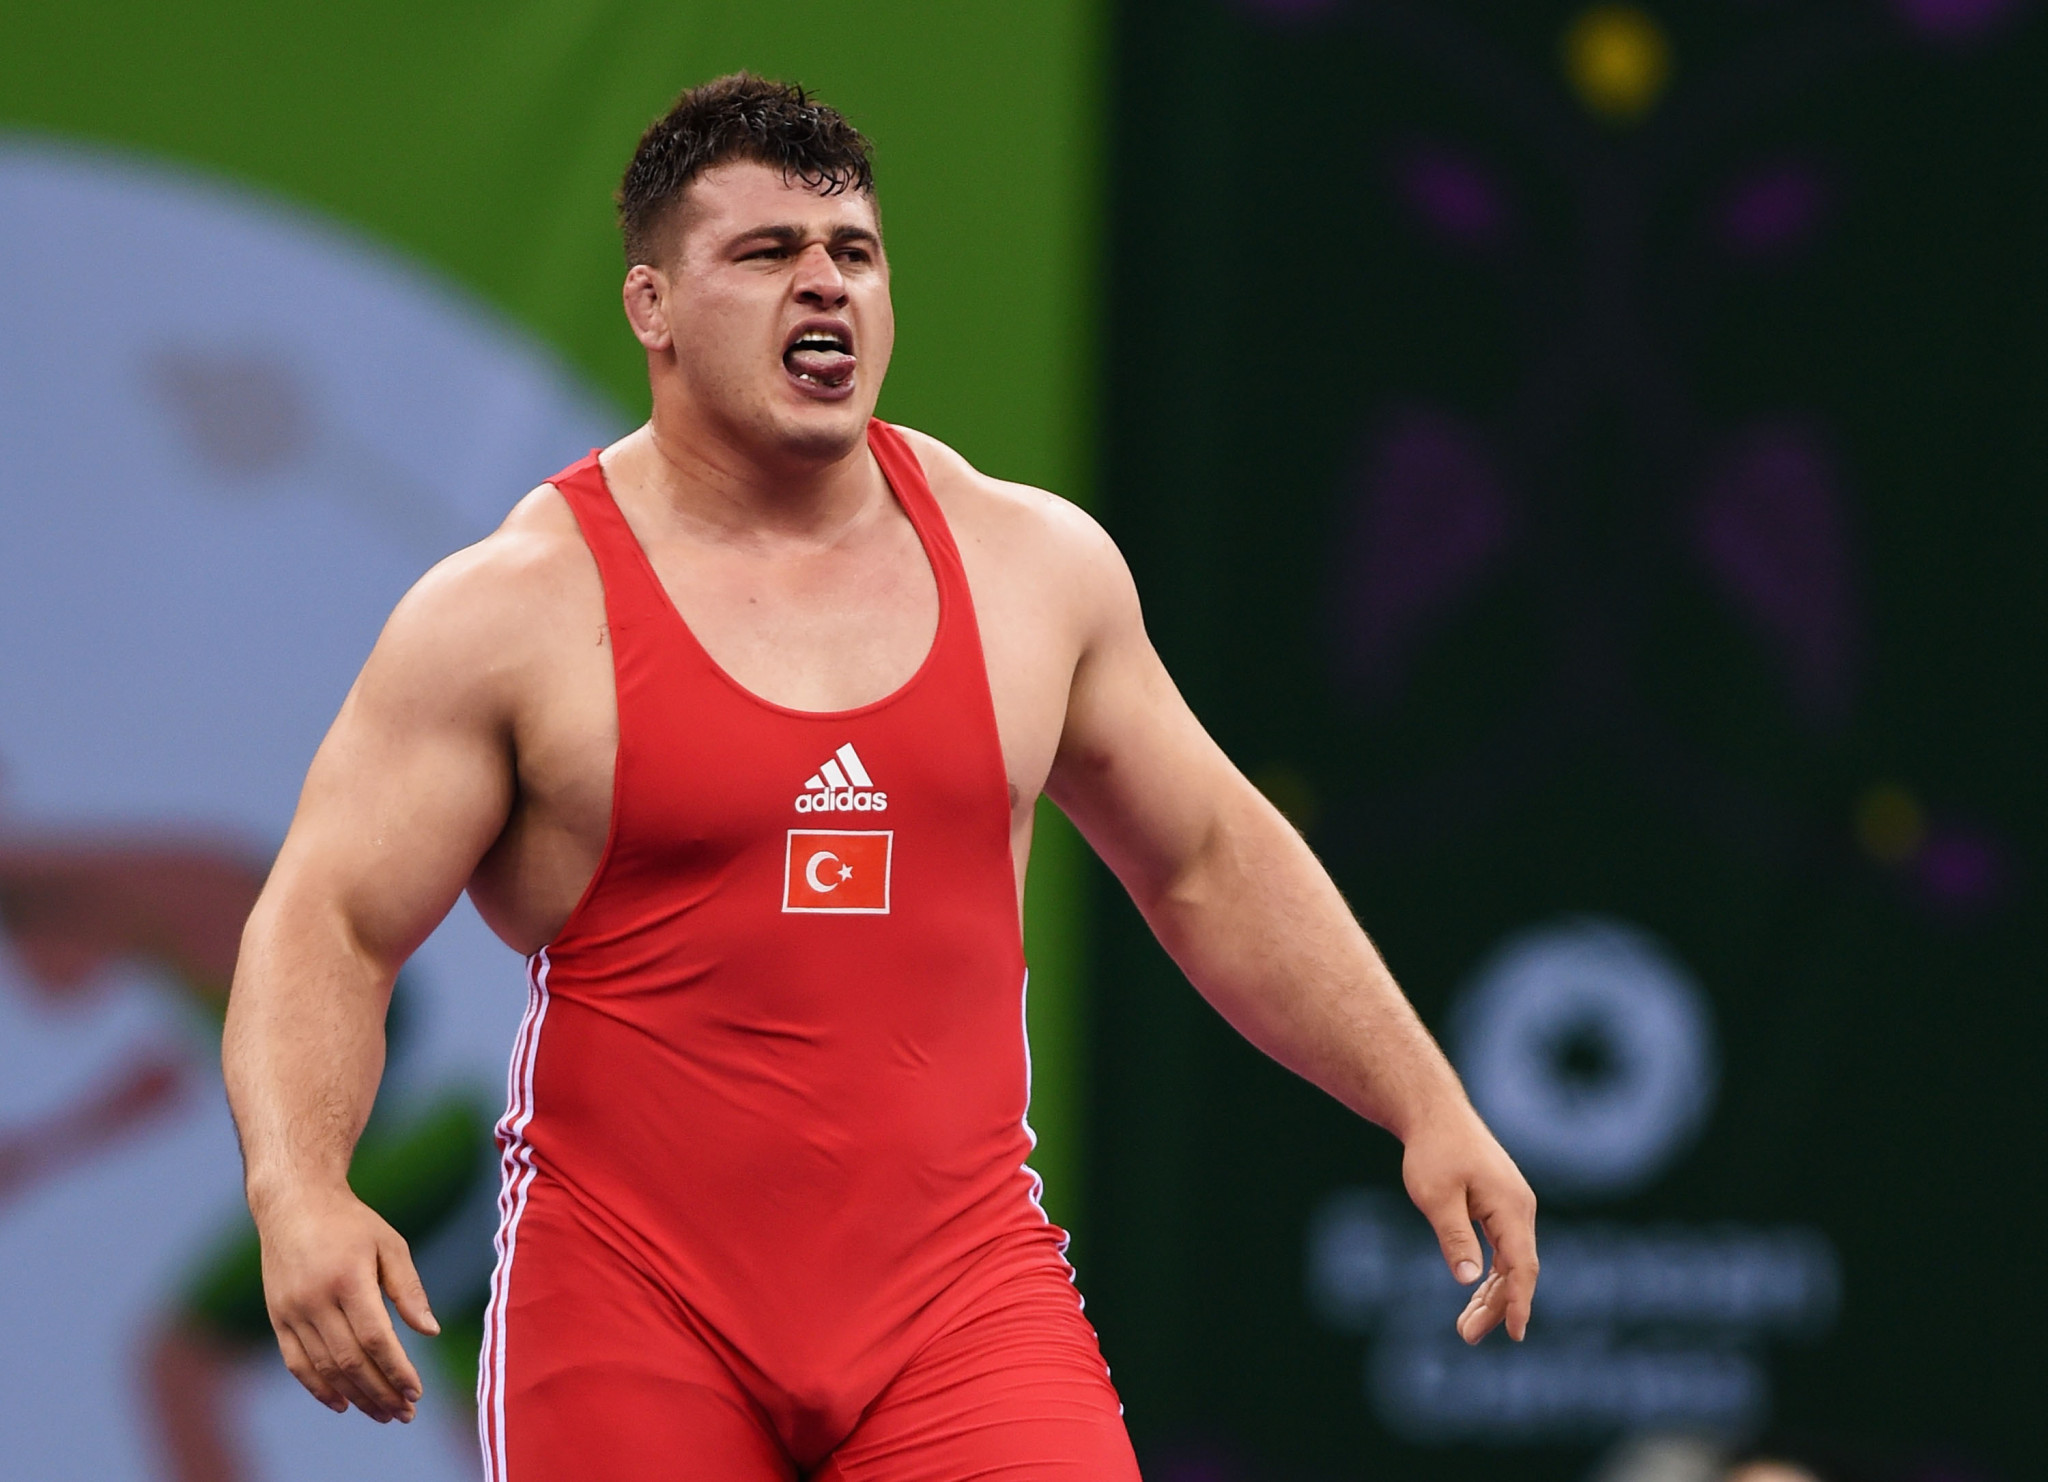 Russia claim two golds in men’s Greco-Roman finals at European Wrestling Championships